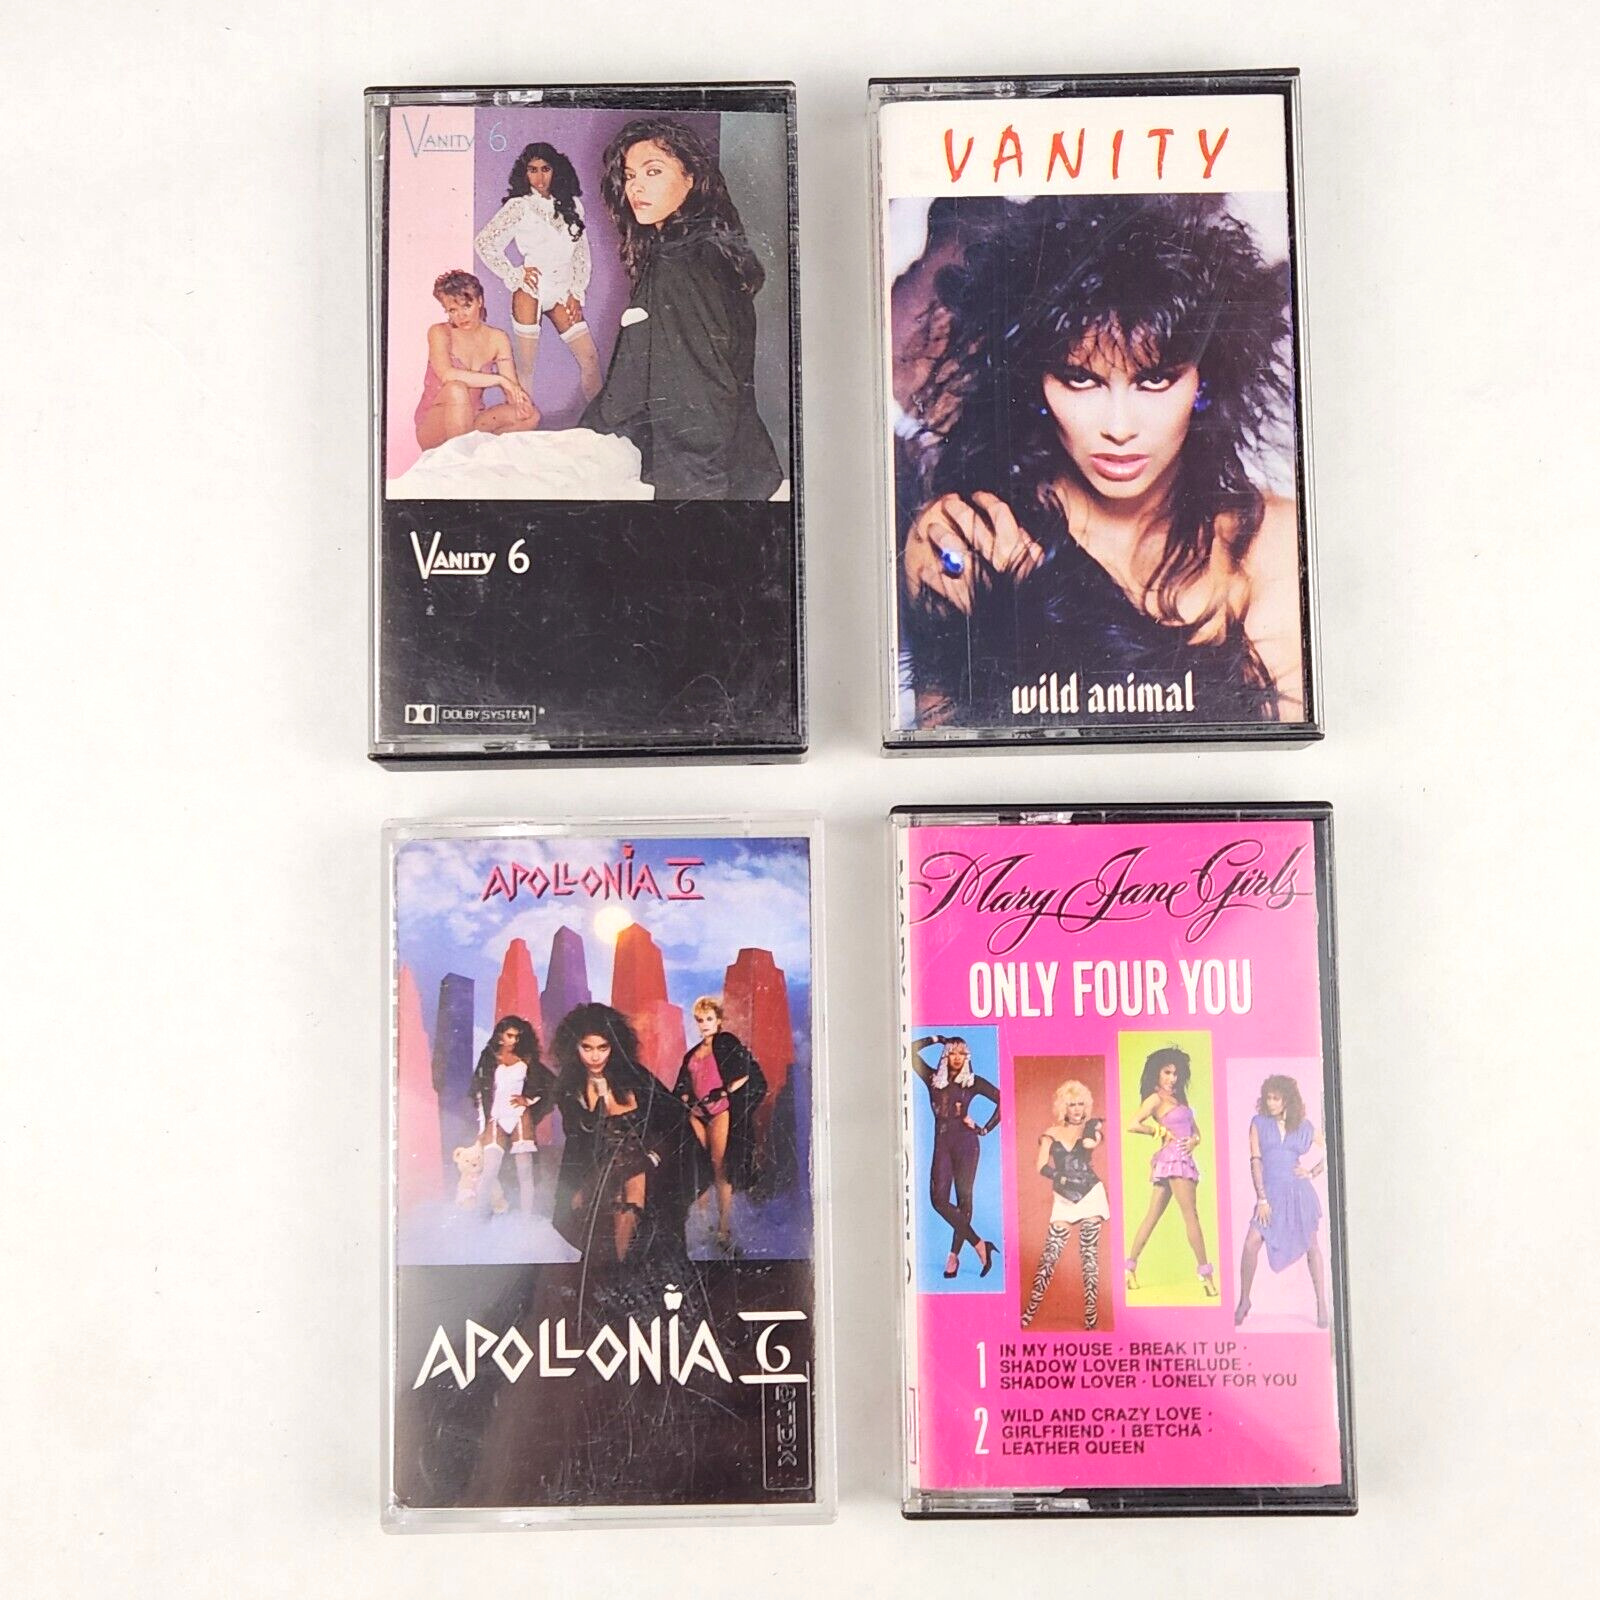 Apollonia 6, Vanity 6, Mary Jane Girls Cassette Tape Lot of 4 Vintage 80s 1980s